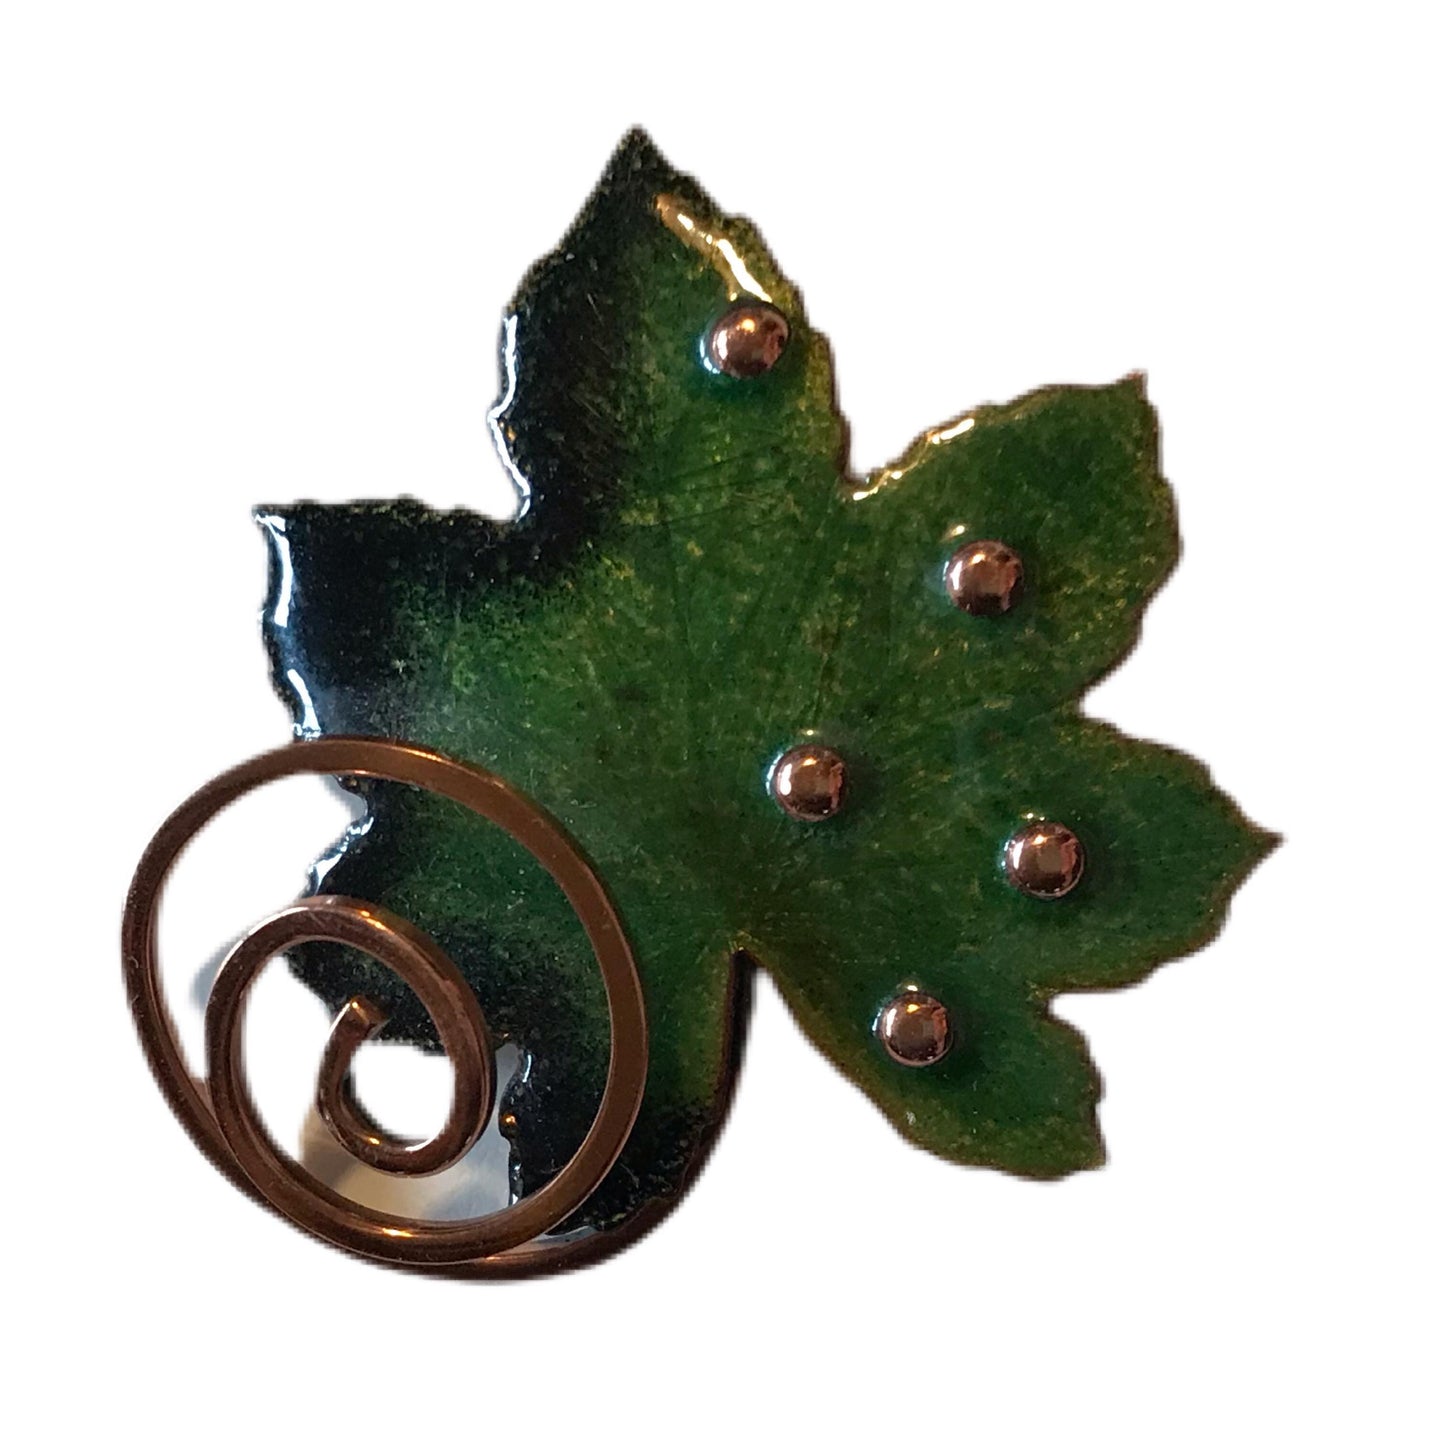 Enameled Copper Green Leaf with Coil Brooch circa 1940s